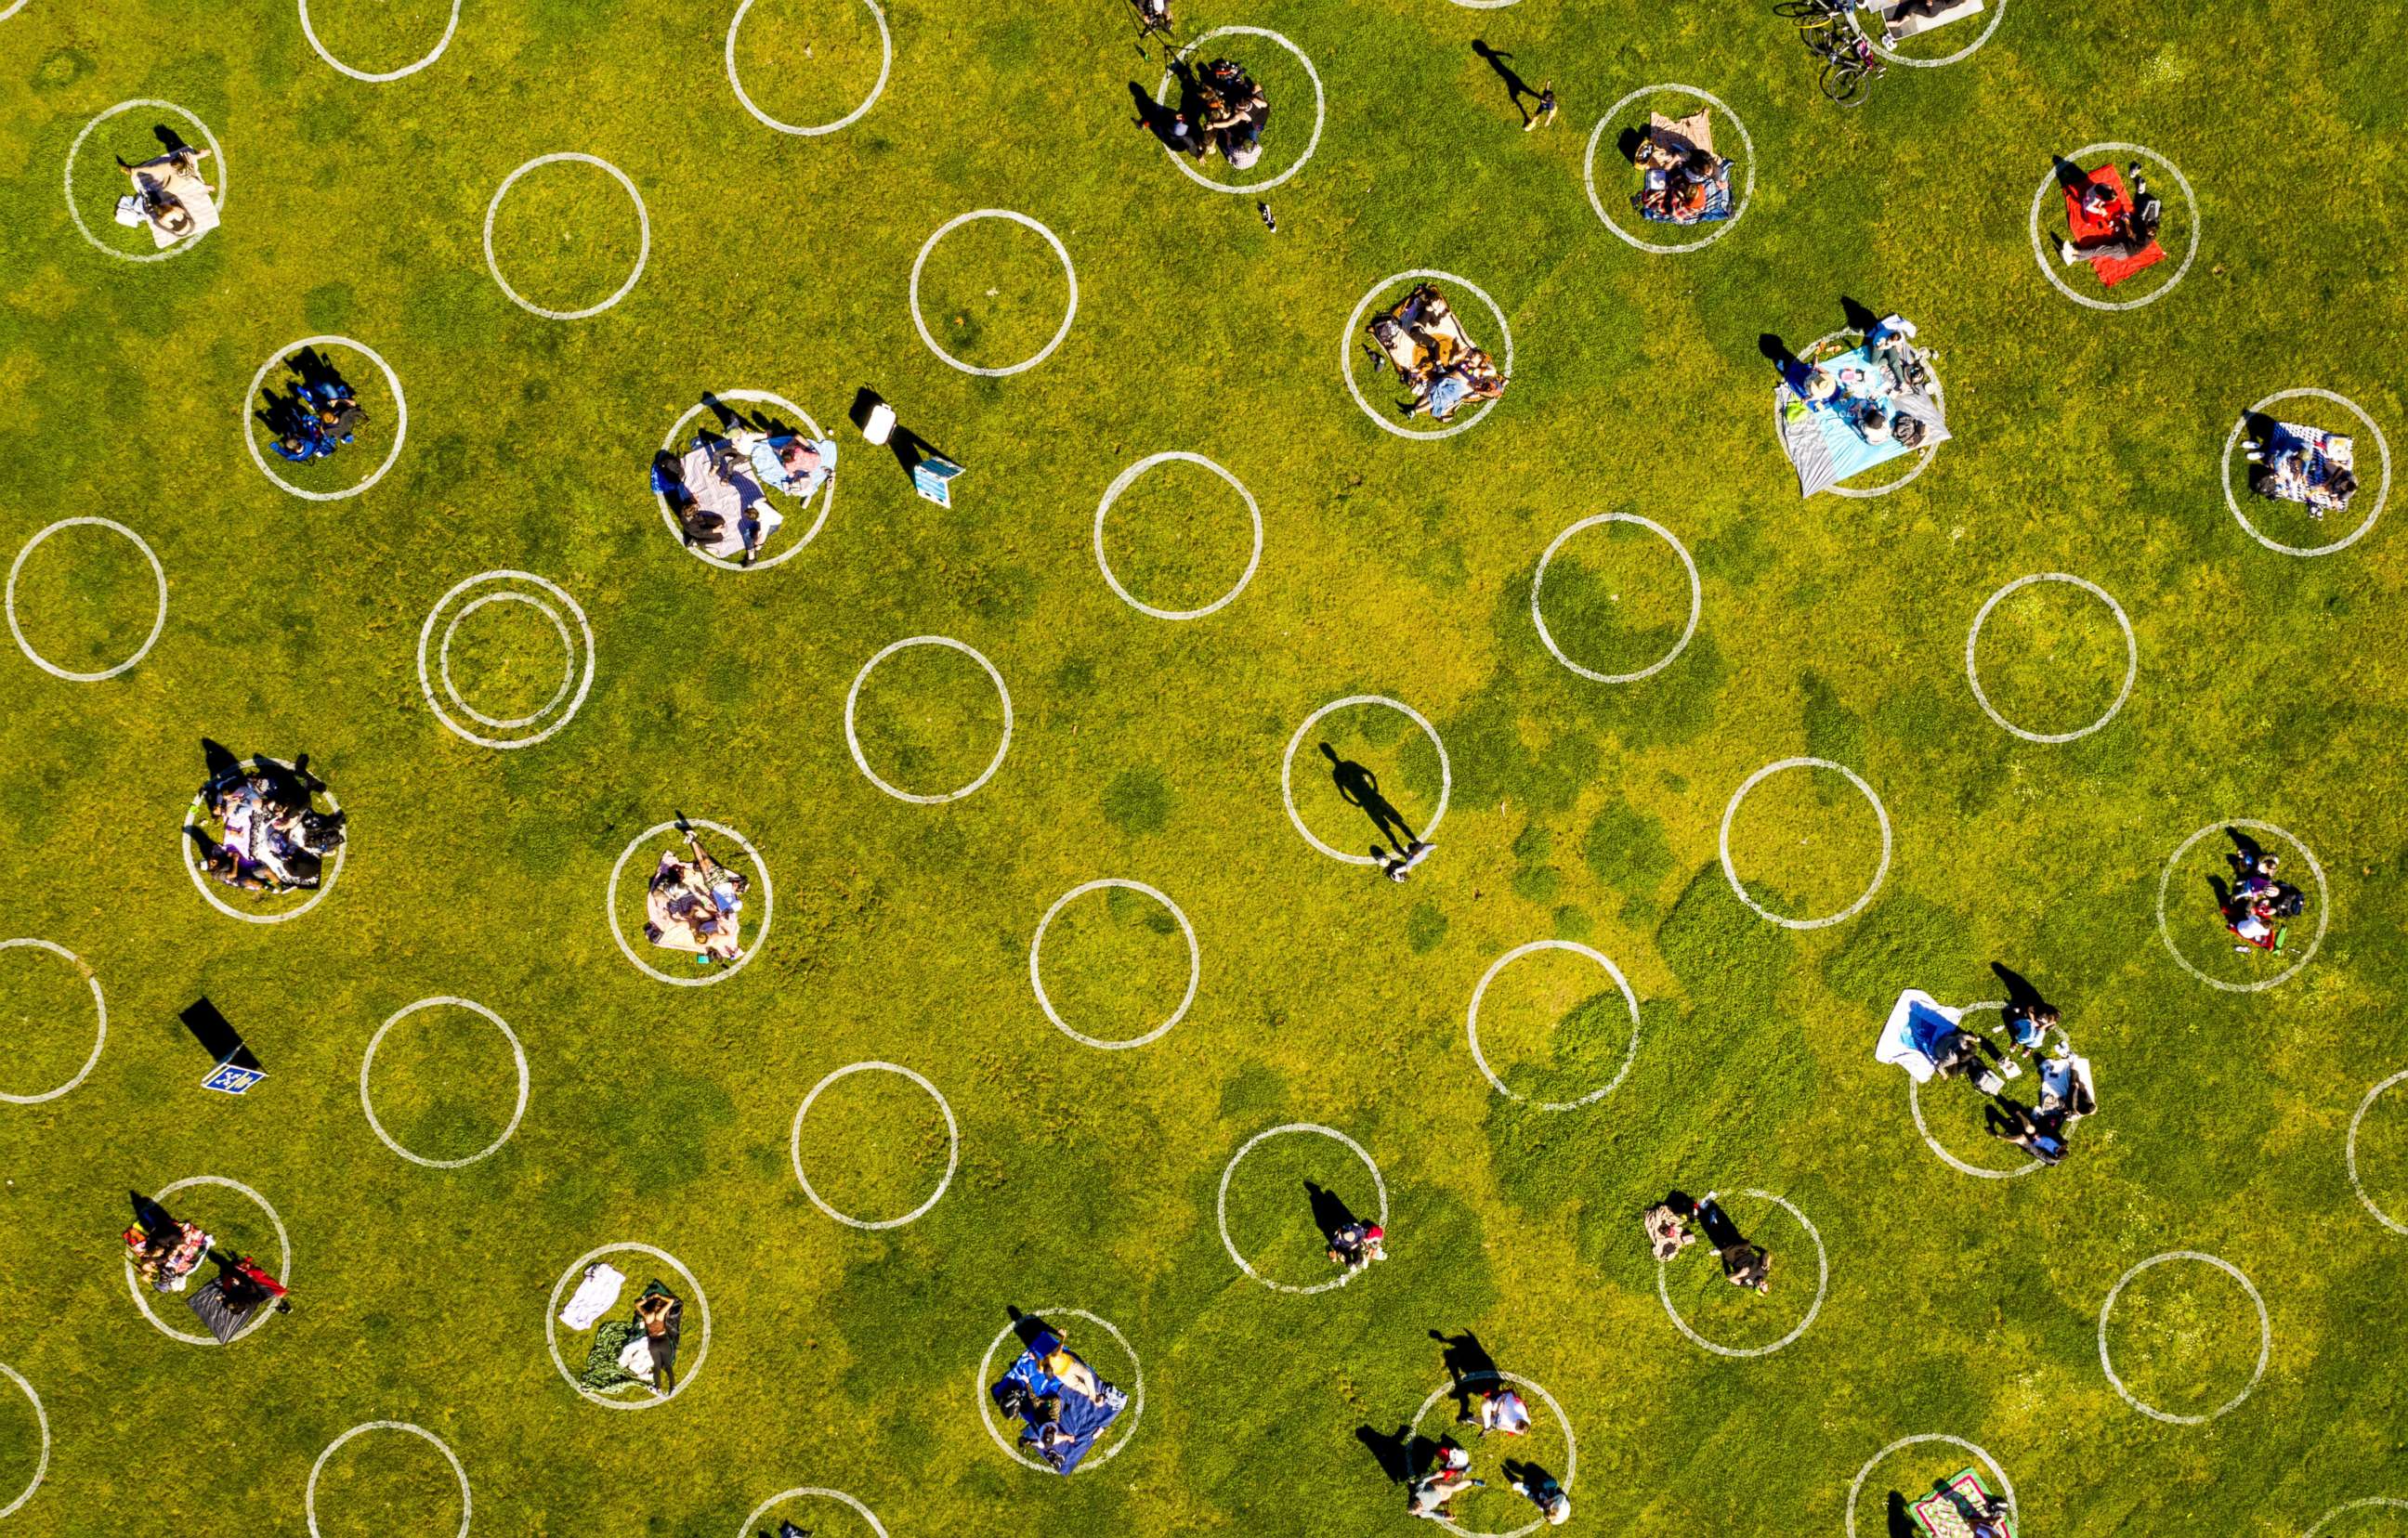 PHOTO: Circles designed to help prevent the spread of the coronavirus by encouraging social distancing line San Francisco's Dolores Park, May 21, 2020.